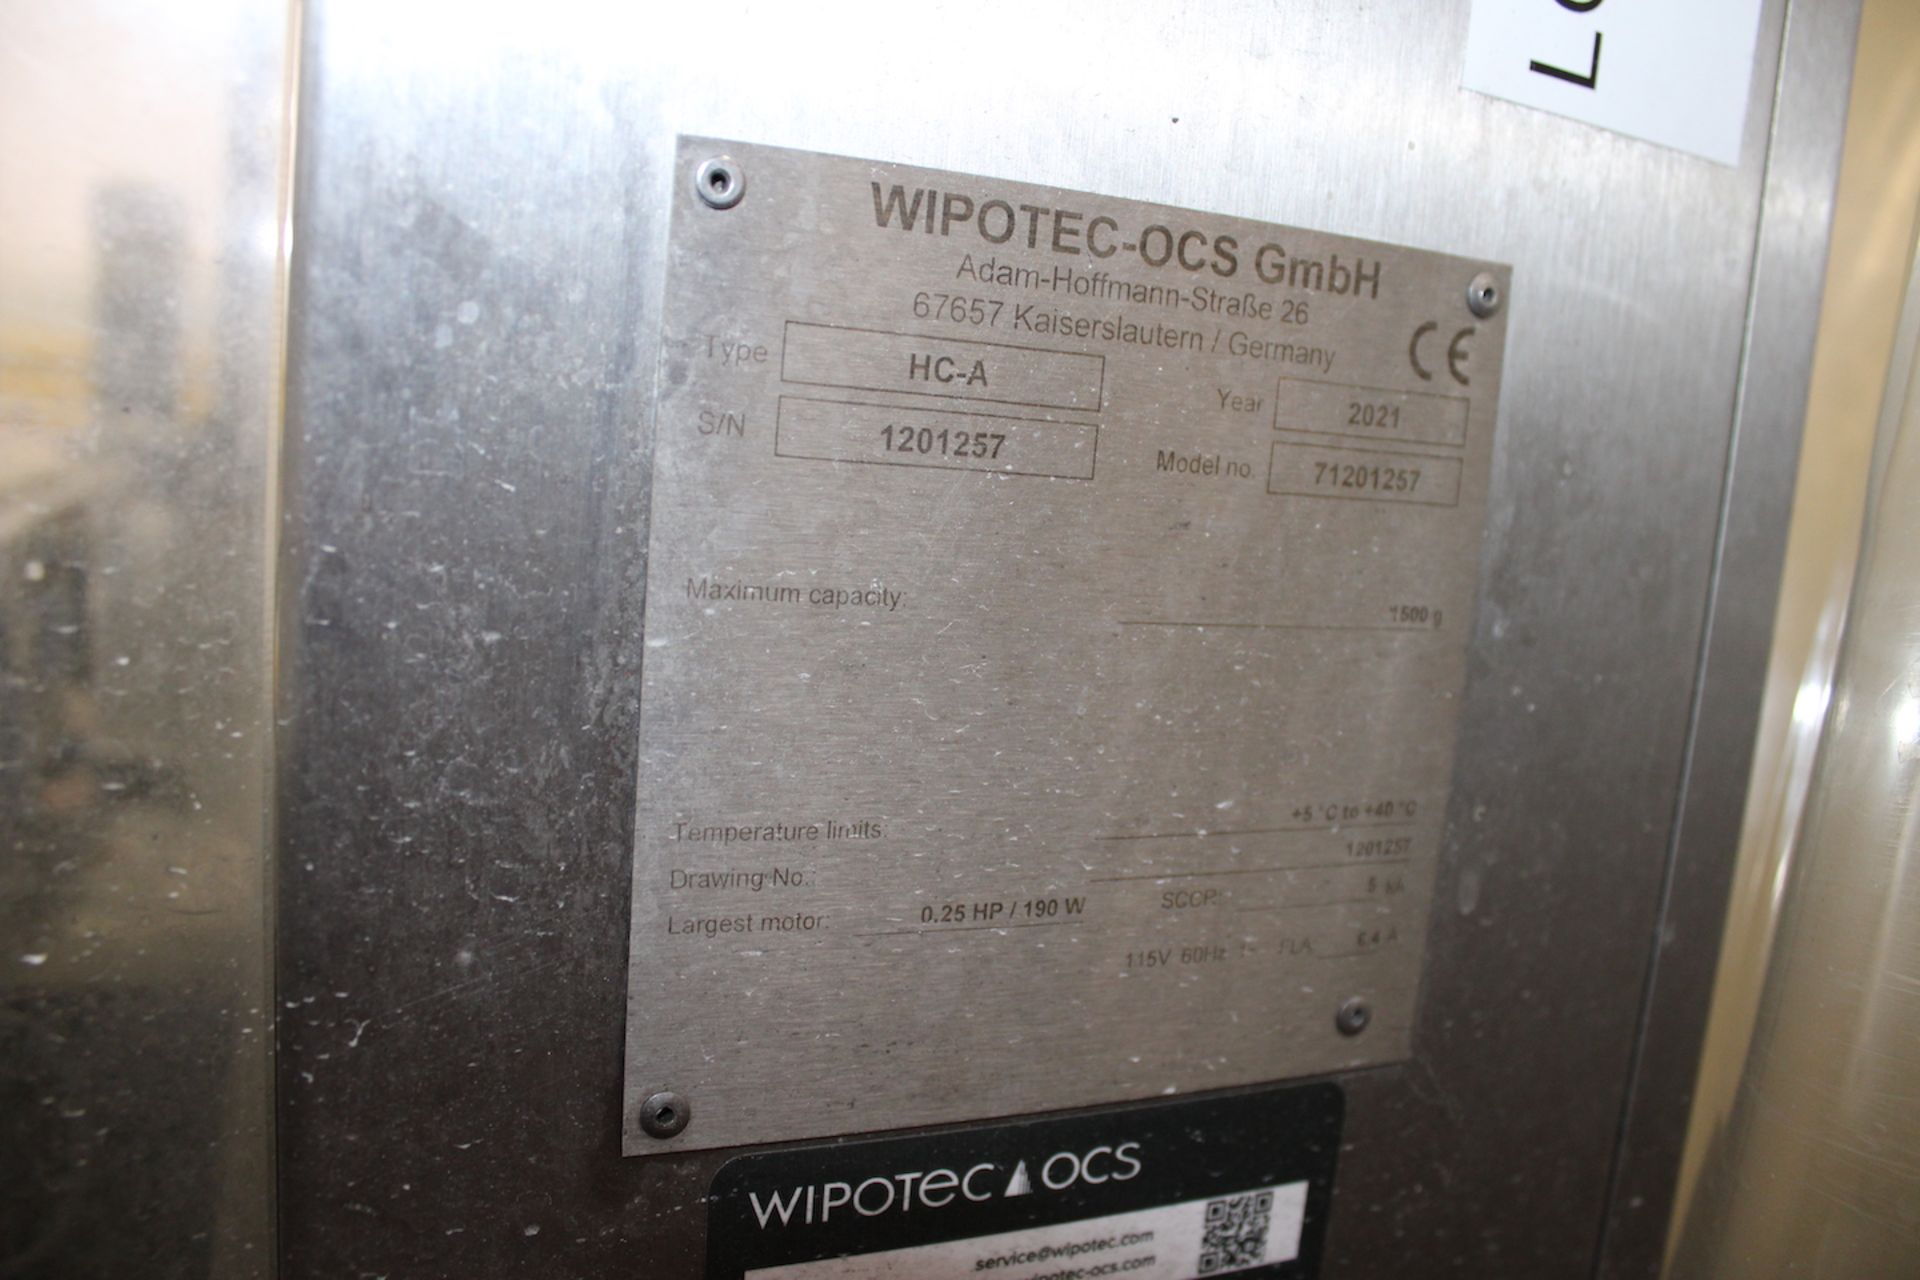 2021 WIPOTEC CHECK WEIGHER, MODEL 71201257, TYPE HC-A, S/N 1201257 (MORE PHOTOS COMING SOON) - Image 3 of 8